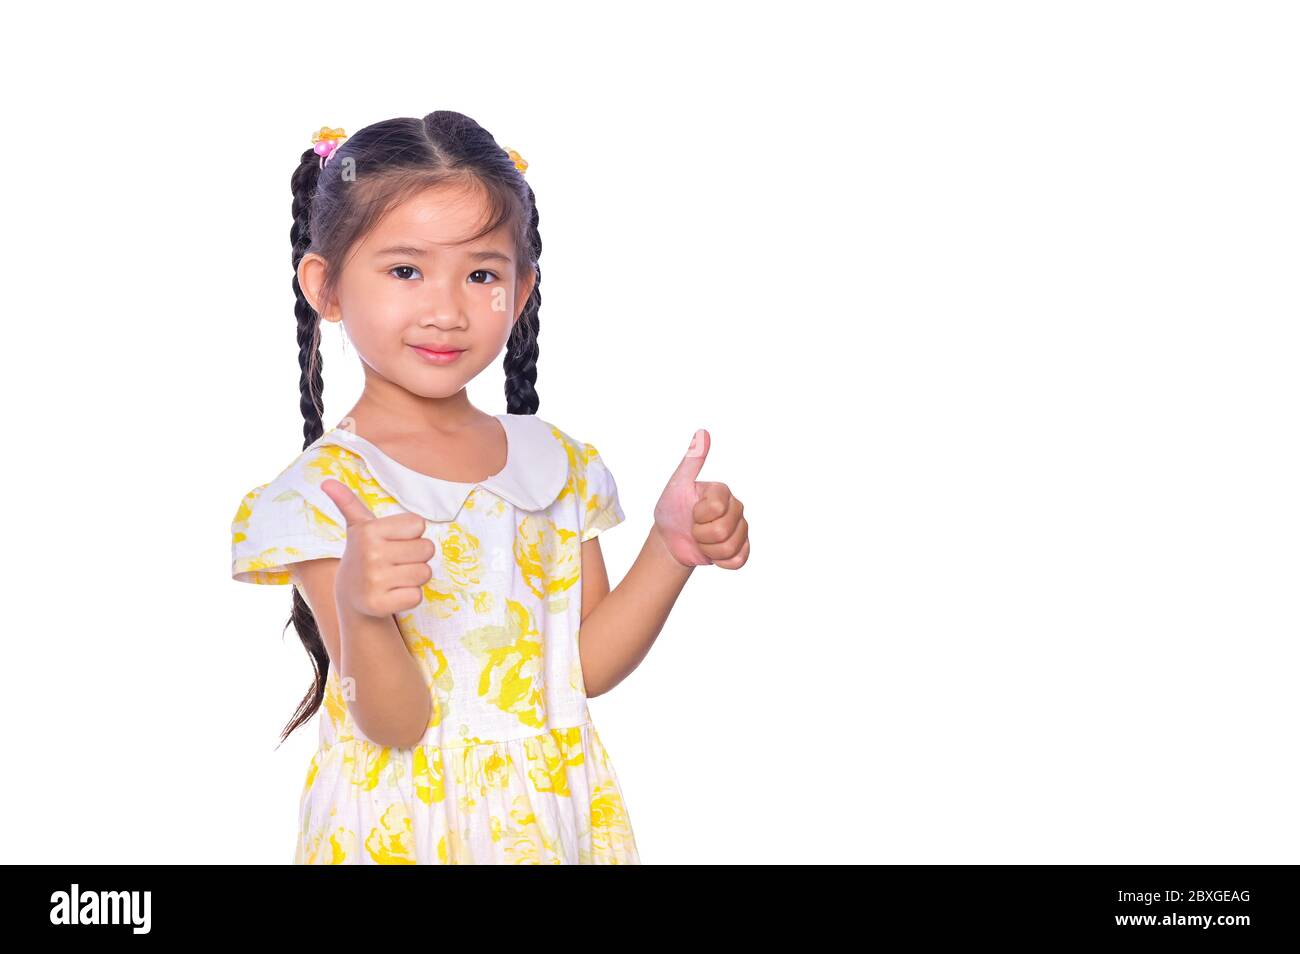 Adorable and cheerful Asian kid giving thumbs up and smile face isolated over white background Stock Photo